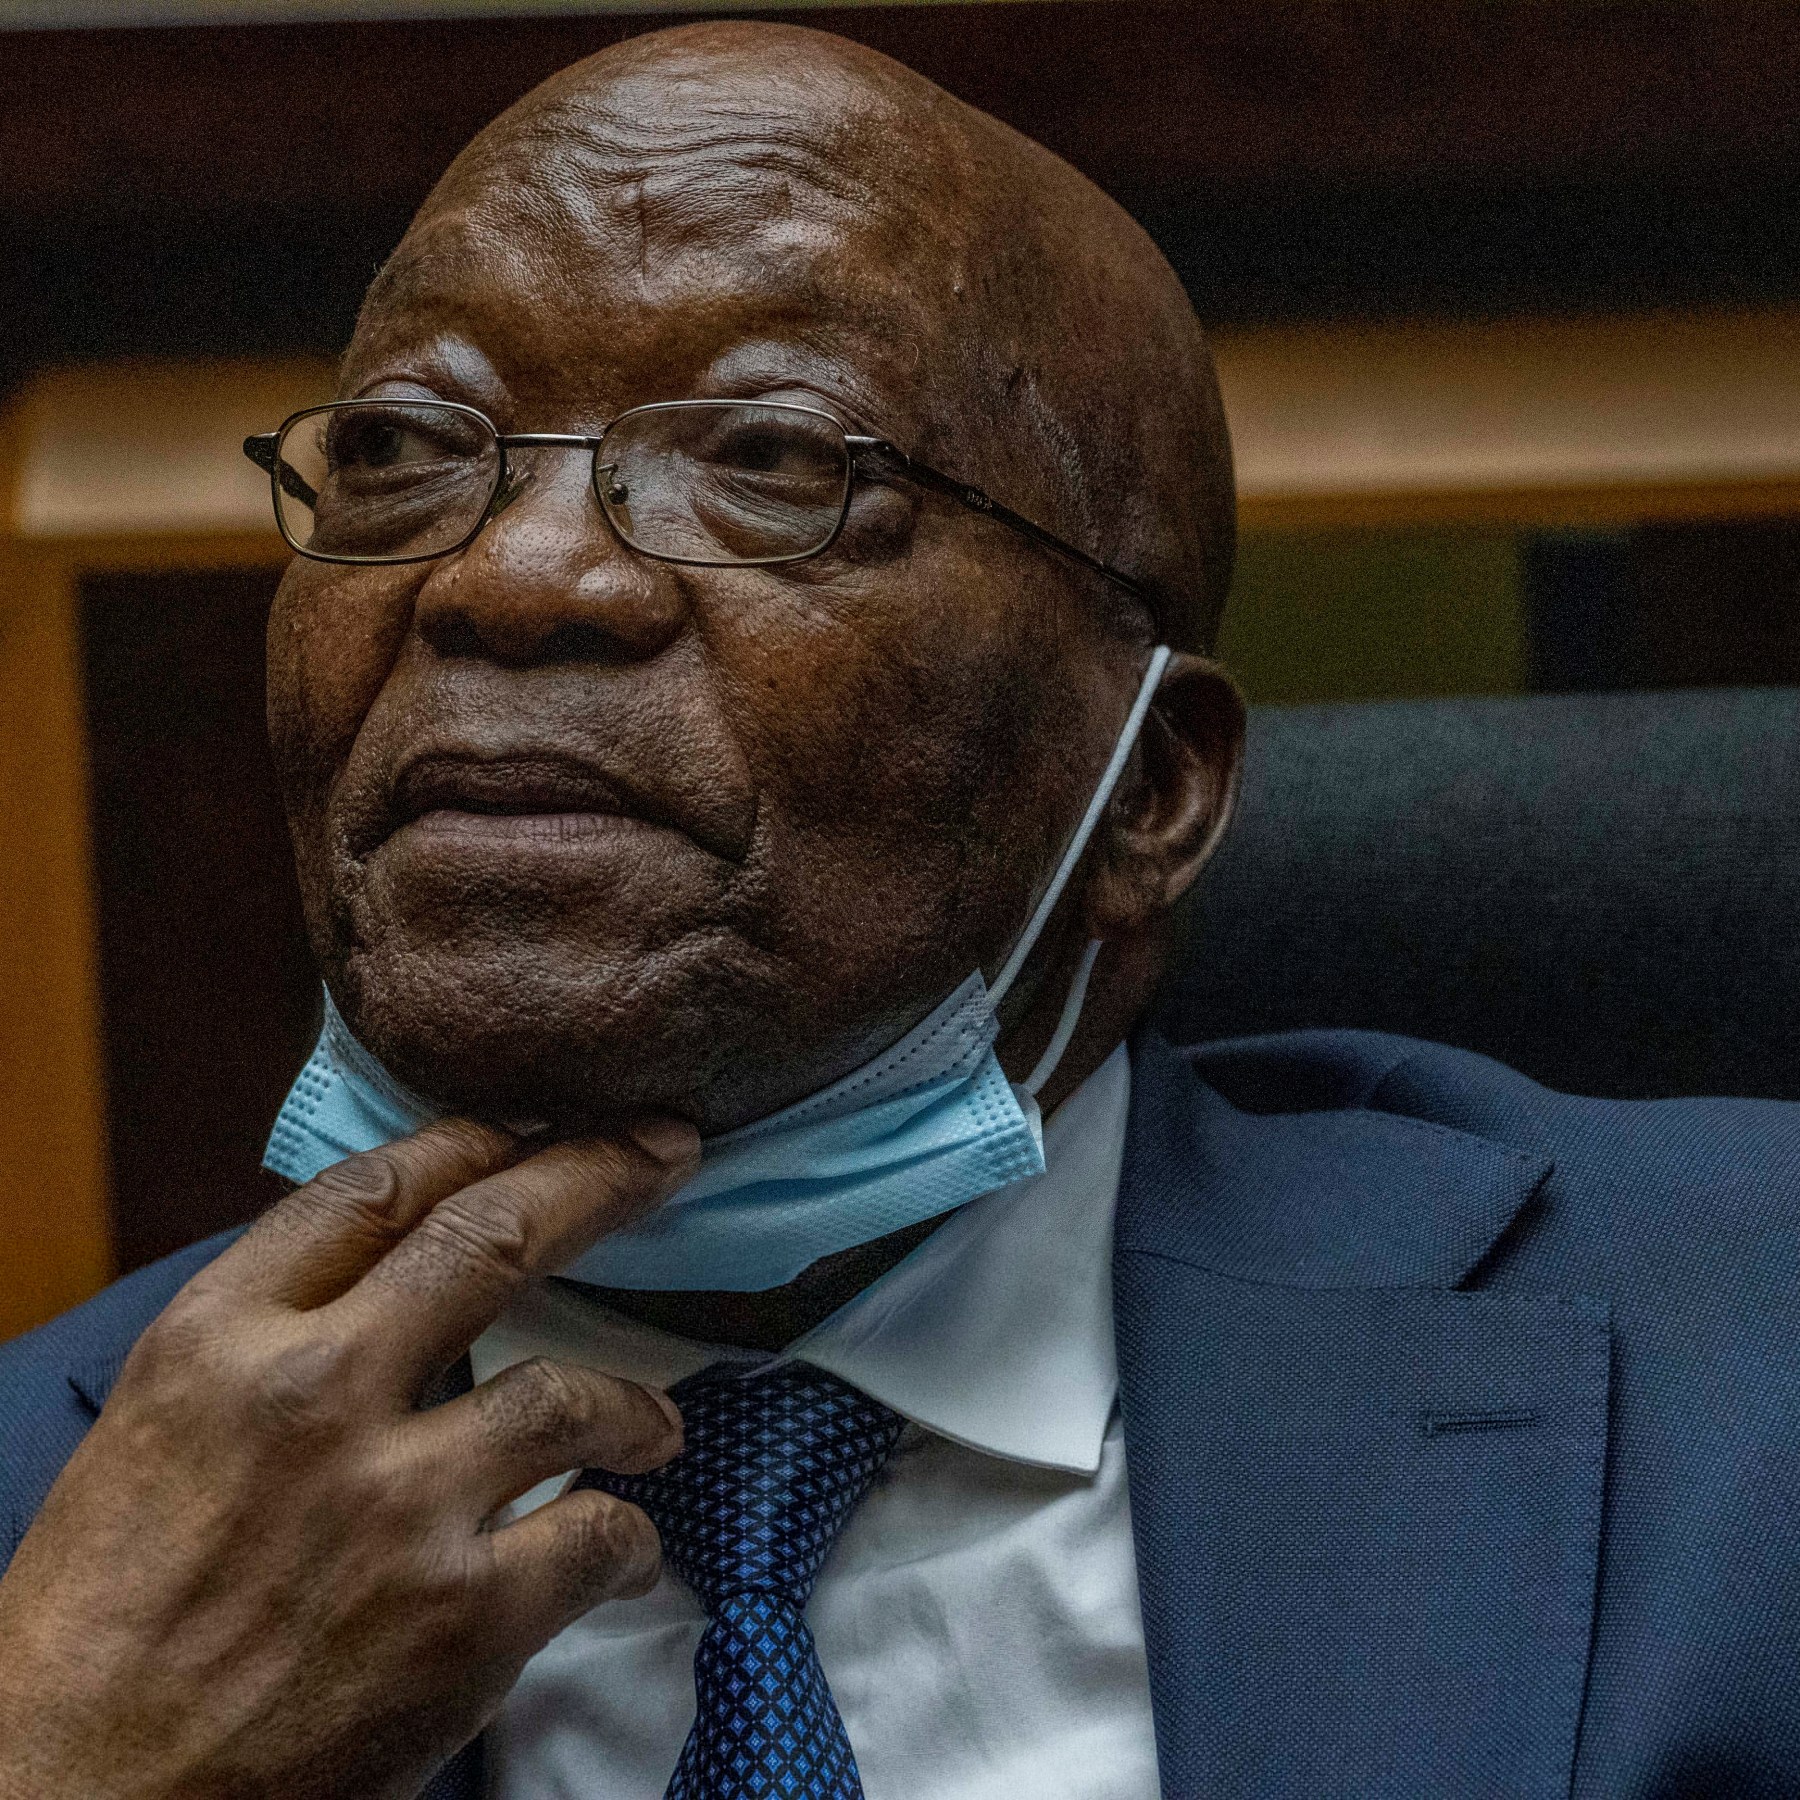 South Africa's Zuma granted remission, avoids return to jail